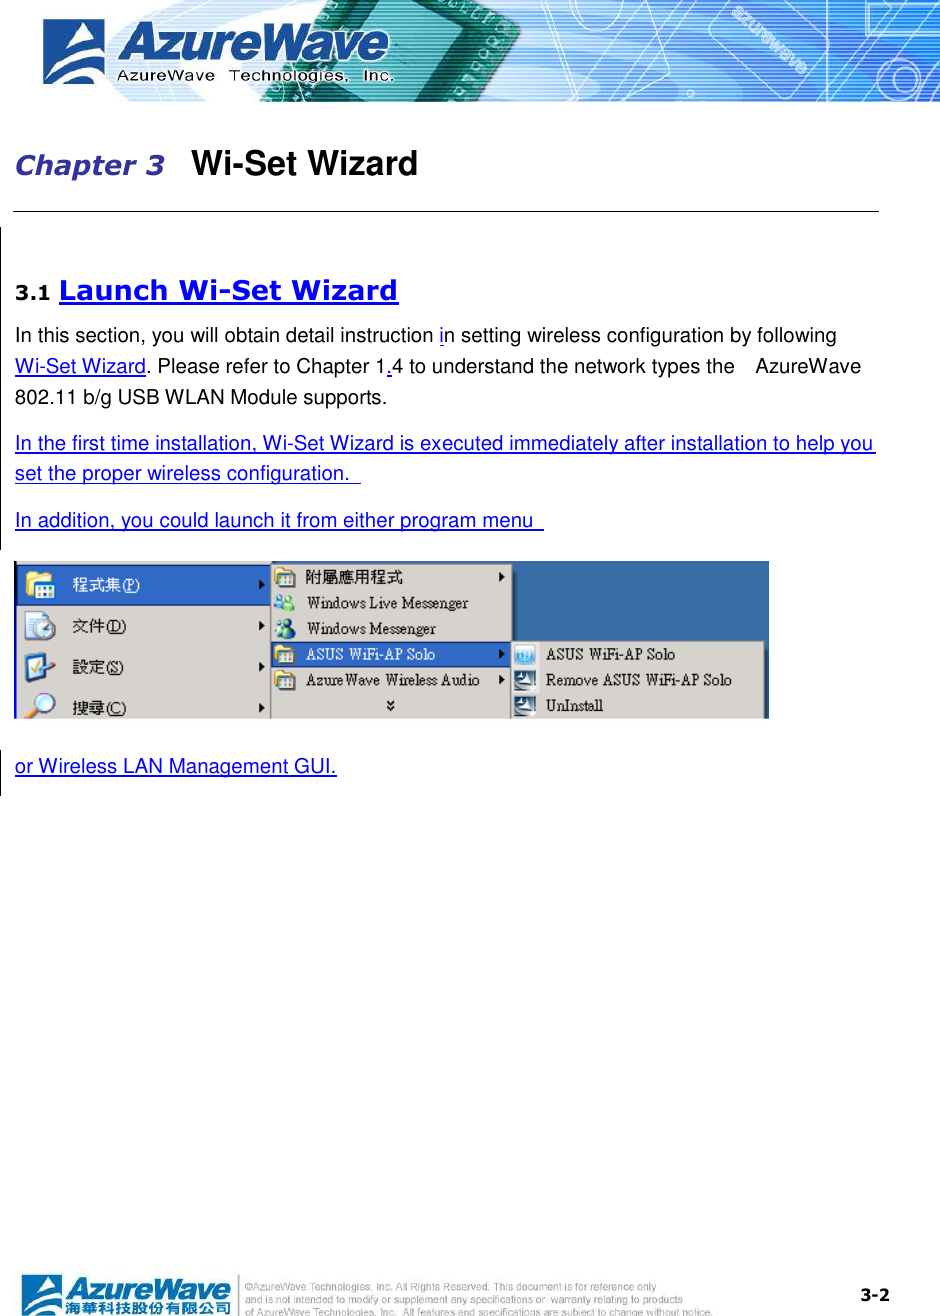  3-2 Chapter 3   Wi-Set Wizard  3.1 Launch Wi-Set Wizard In this section, you will obtain detail instruction in setting wireless configuration by following Wi-Set Wizard. Please refer to Chapter 1.4 to understand the network types the    AzureWave 802.11 b/g USB WLAN Module supports. In the first time installation, Wi-Set Wizard is executed immediately after installation to help you set the proper wireless configuration.   In addition, you could launch it from either program menu    or Wireless LAN Management GUI. 